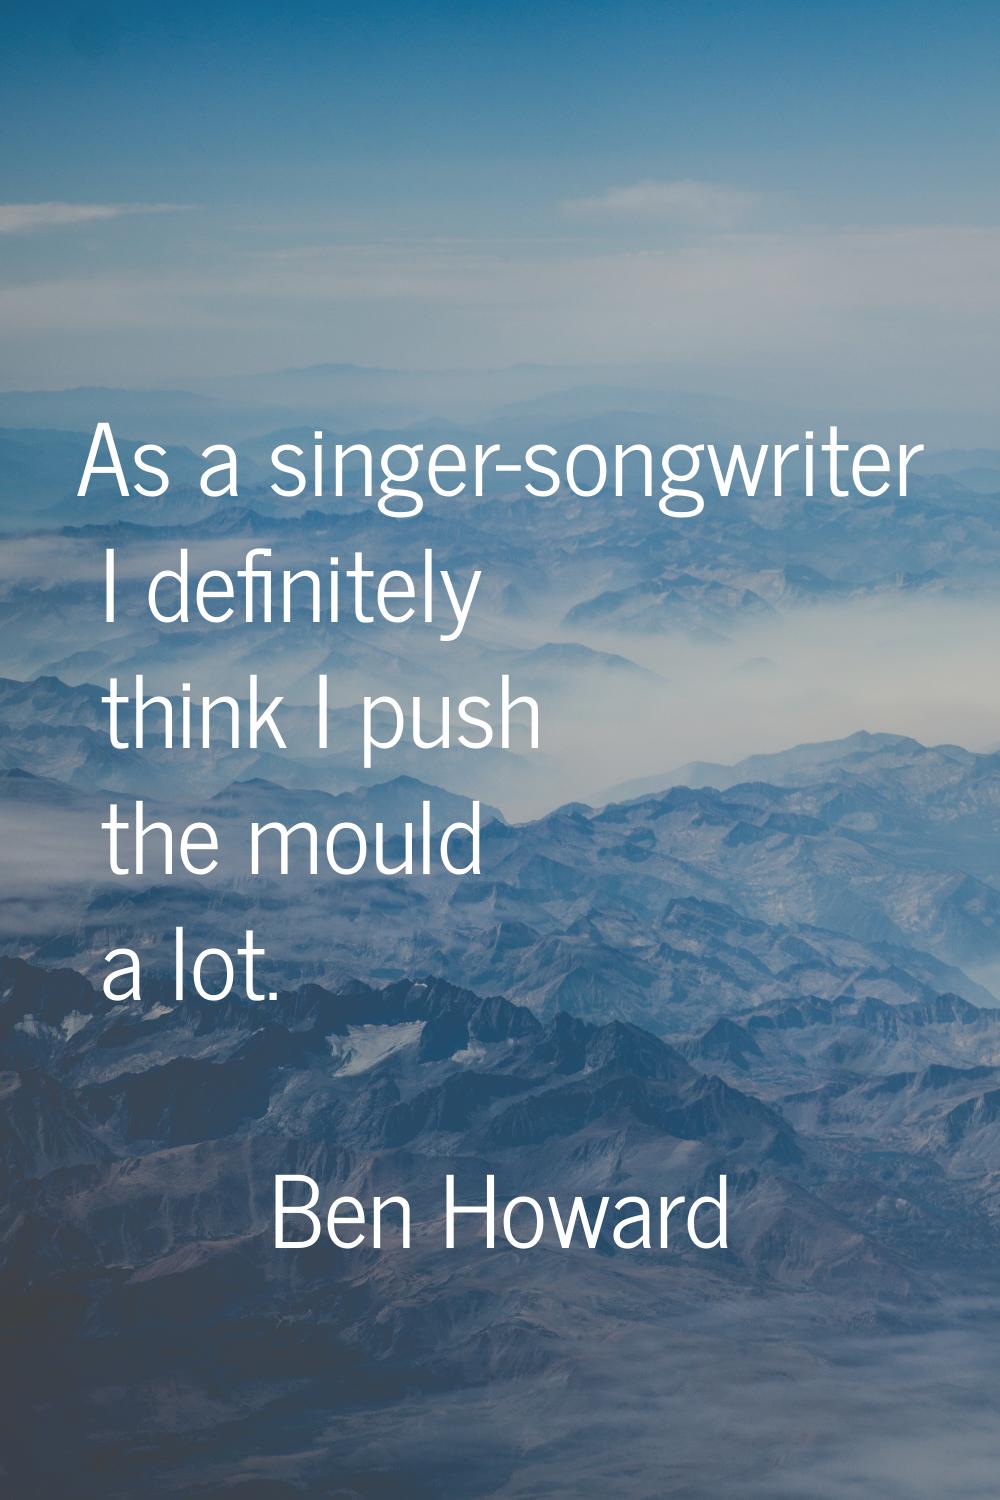 As a singer-songwriter I definitely think I push the mould a lot.